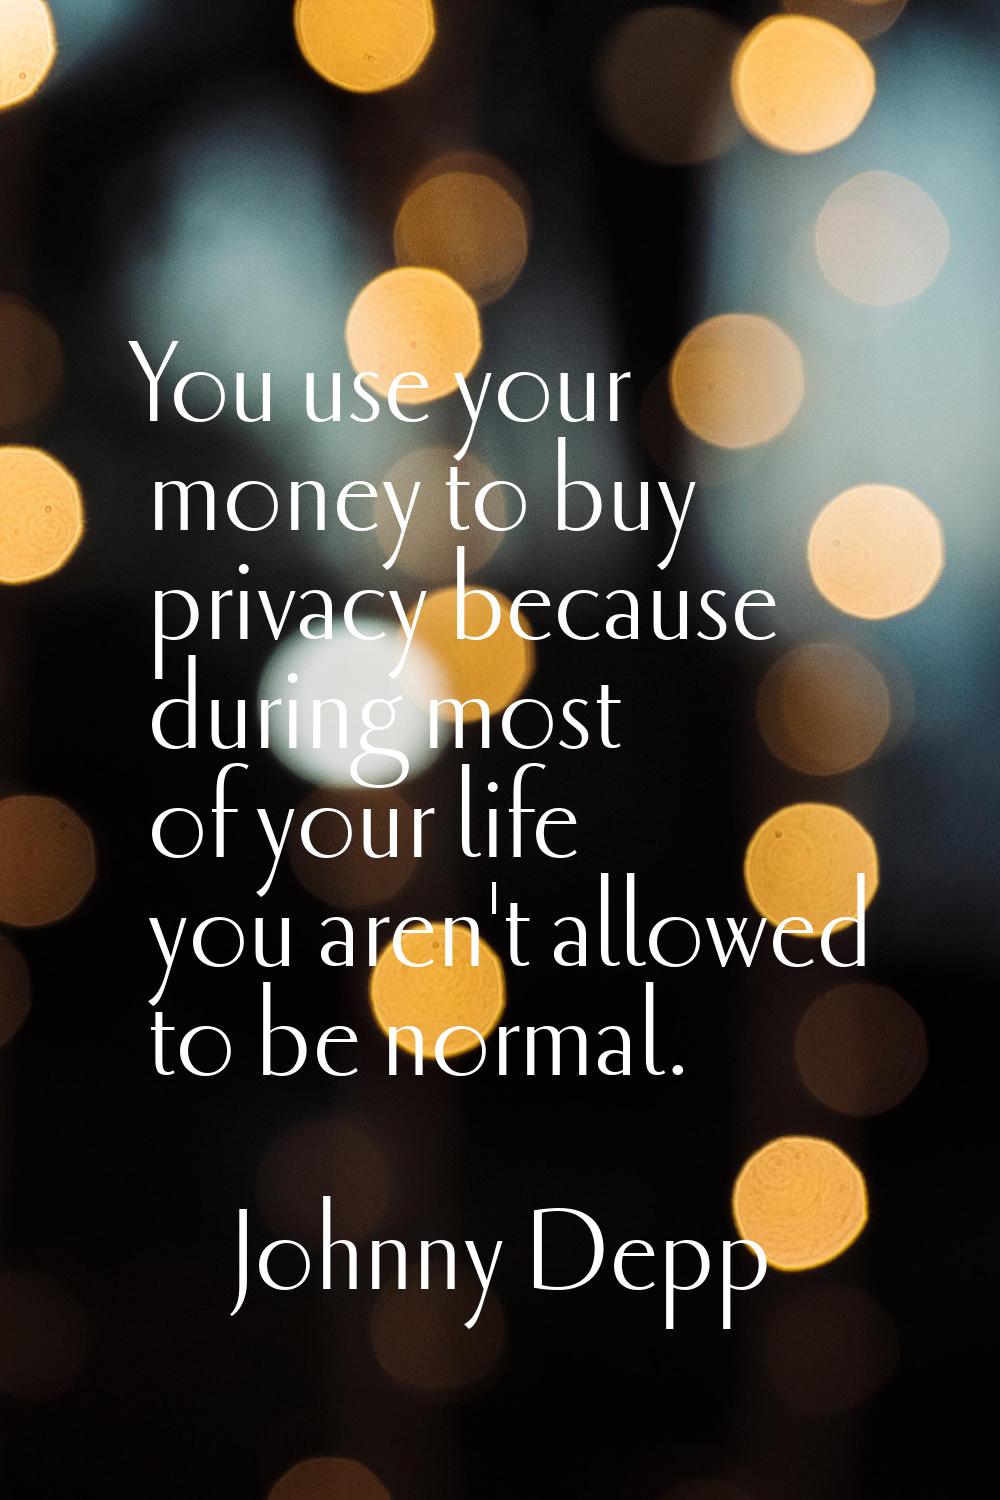 You use your money to buy privacy because during most of your life you aren't allowed to be normal.